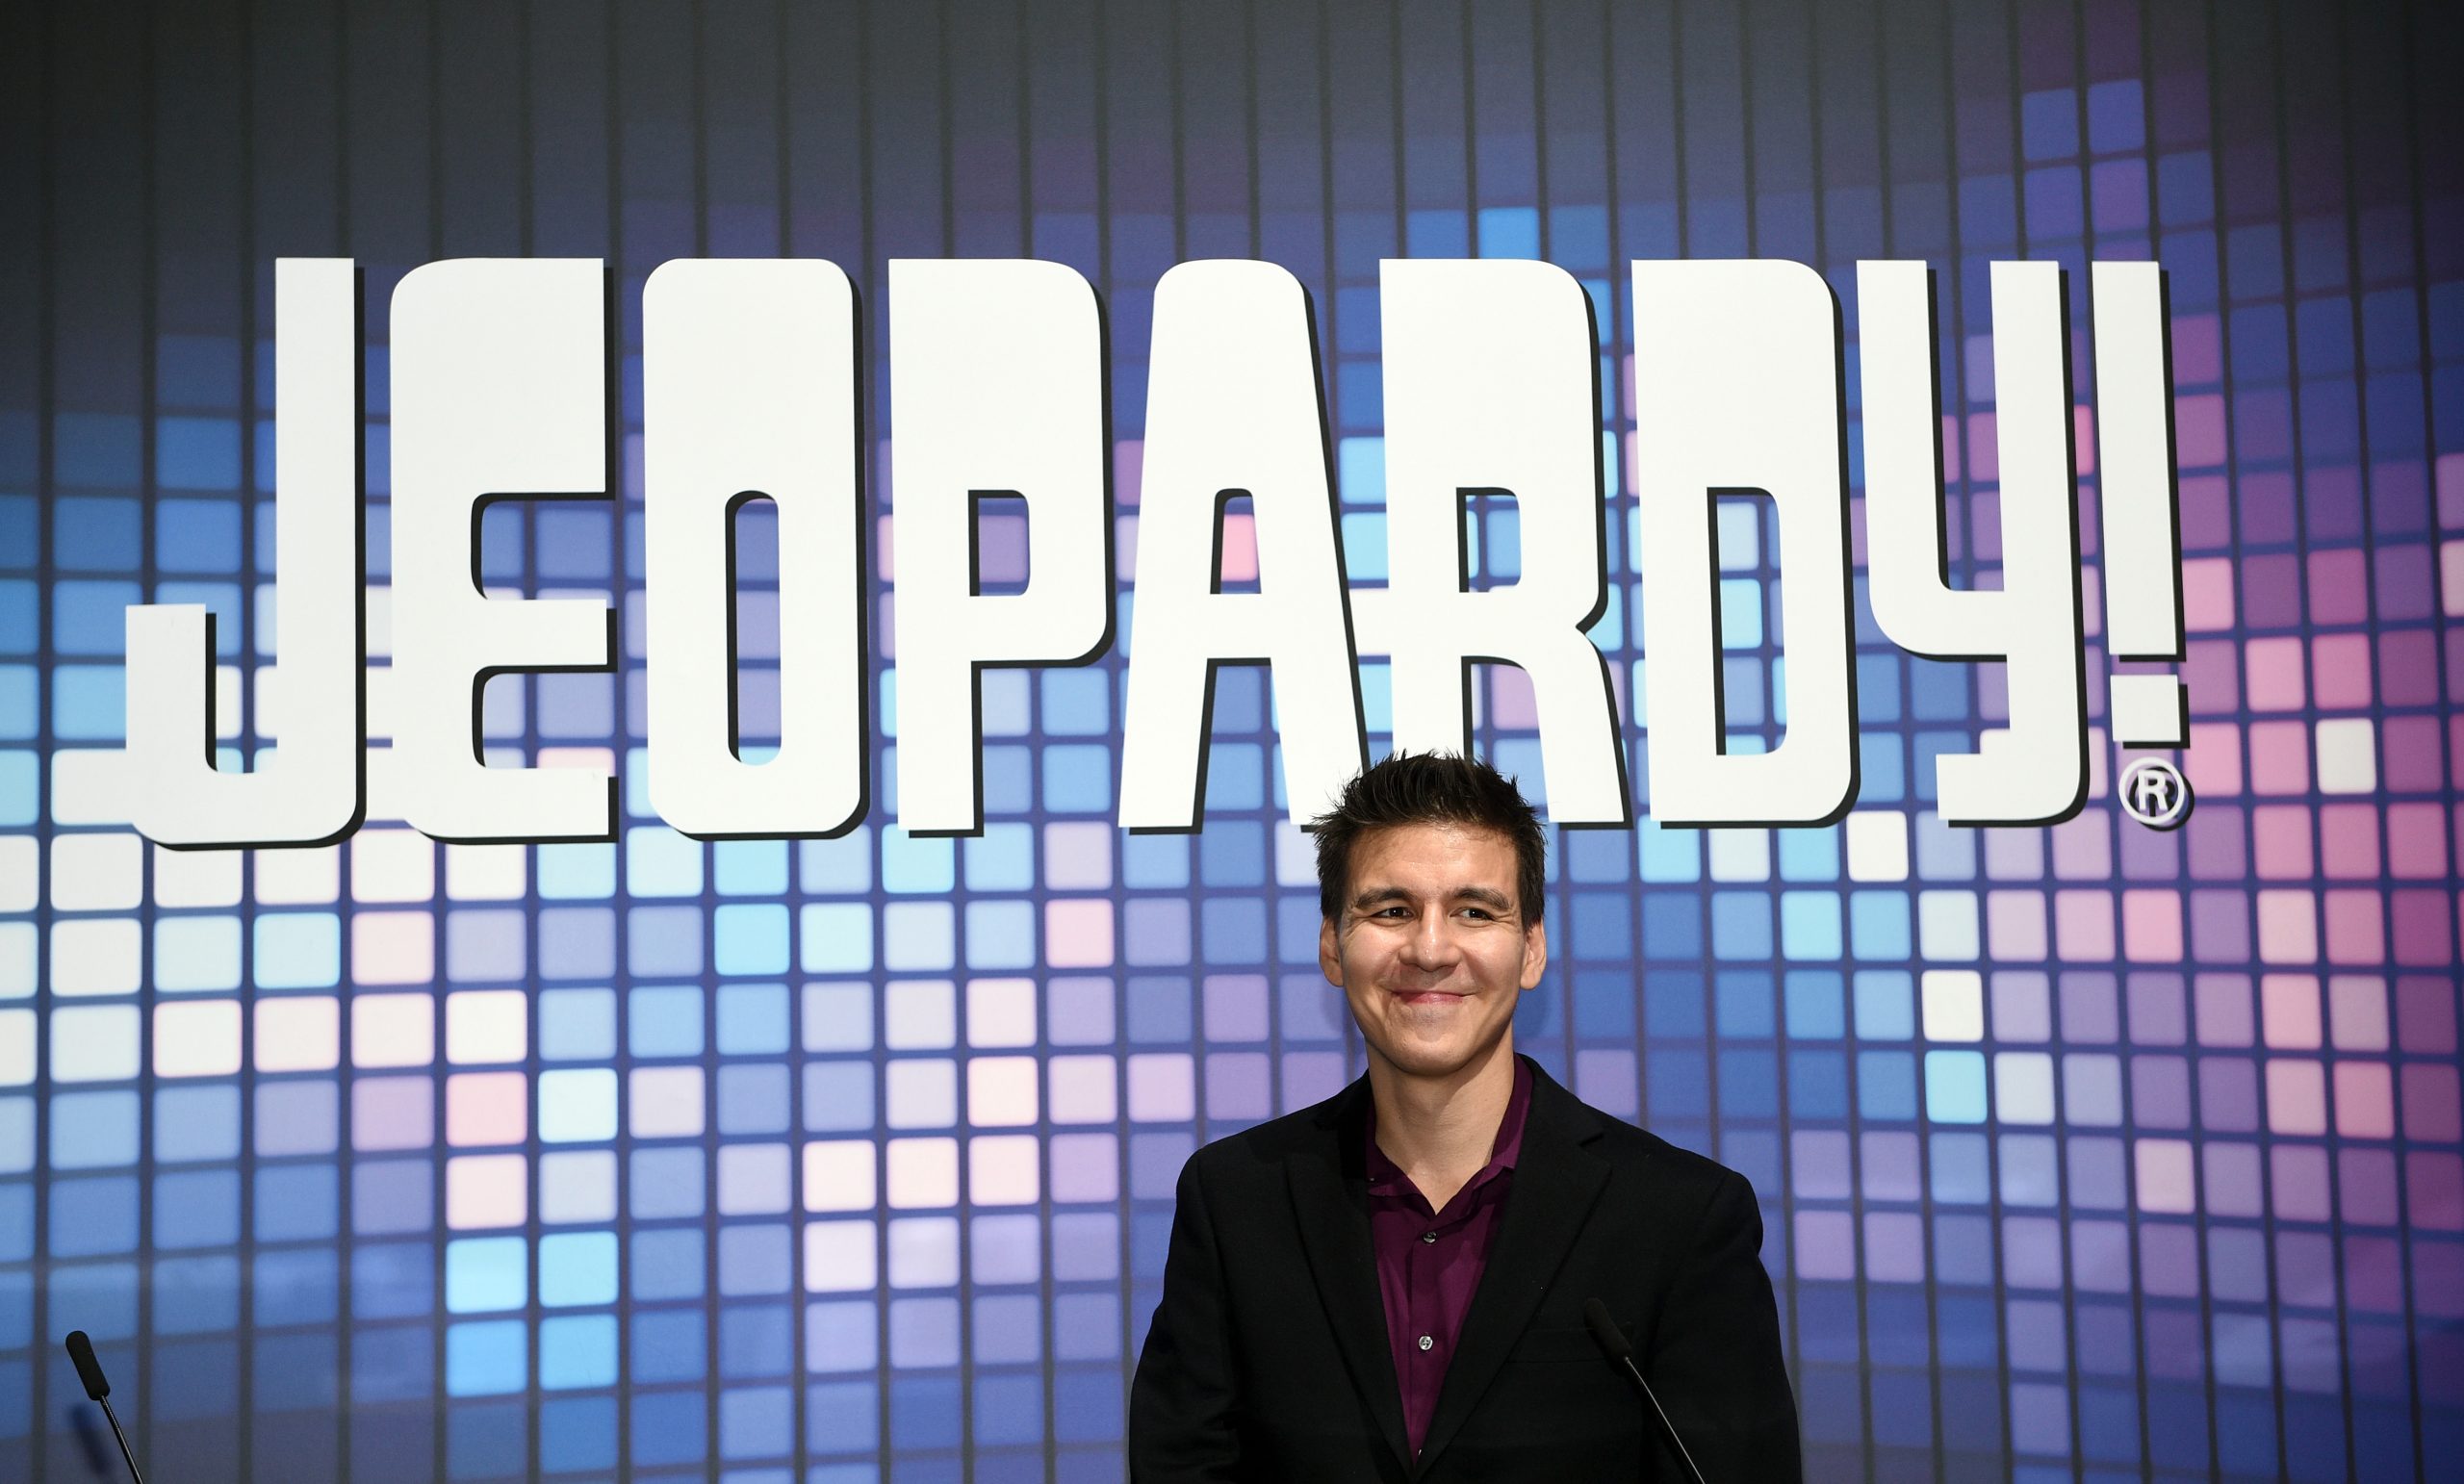 Former 'Jeopardy!' champion James Holzhauer poses at the IGT booth during the trade show debut of two  Jeopardy!'-themed IGT slot machines during the Global Gaming Expo (G2E) at the Sands Expo and Convention Center